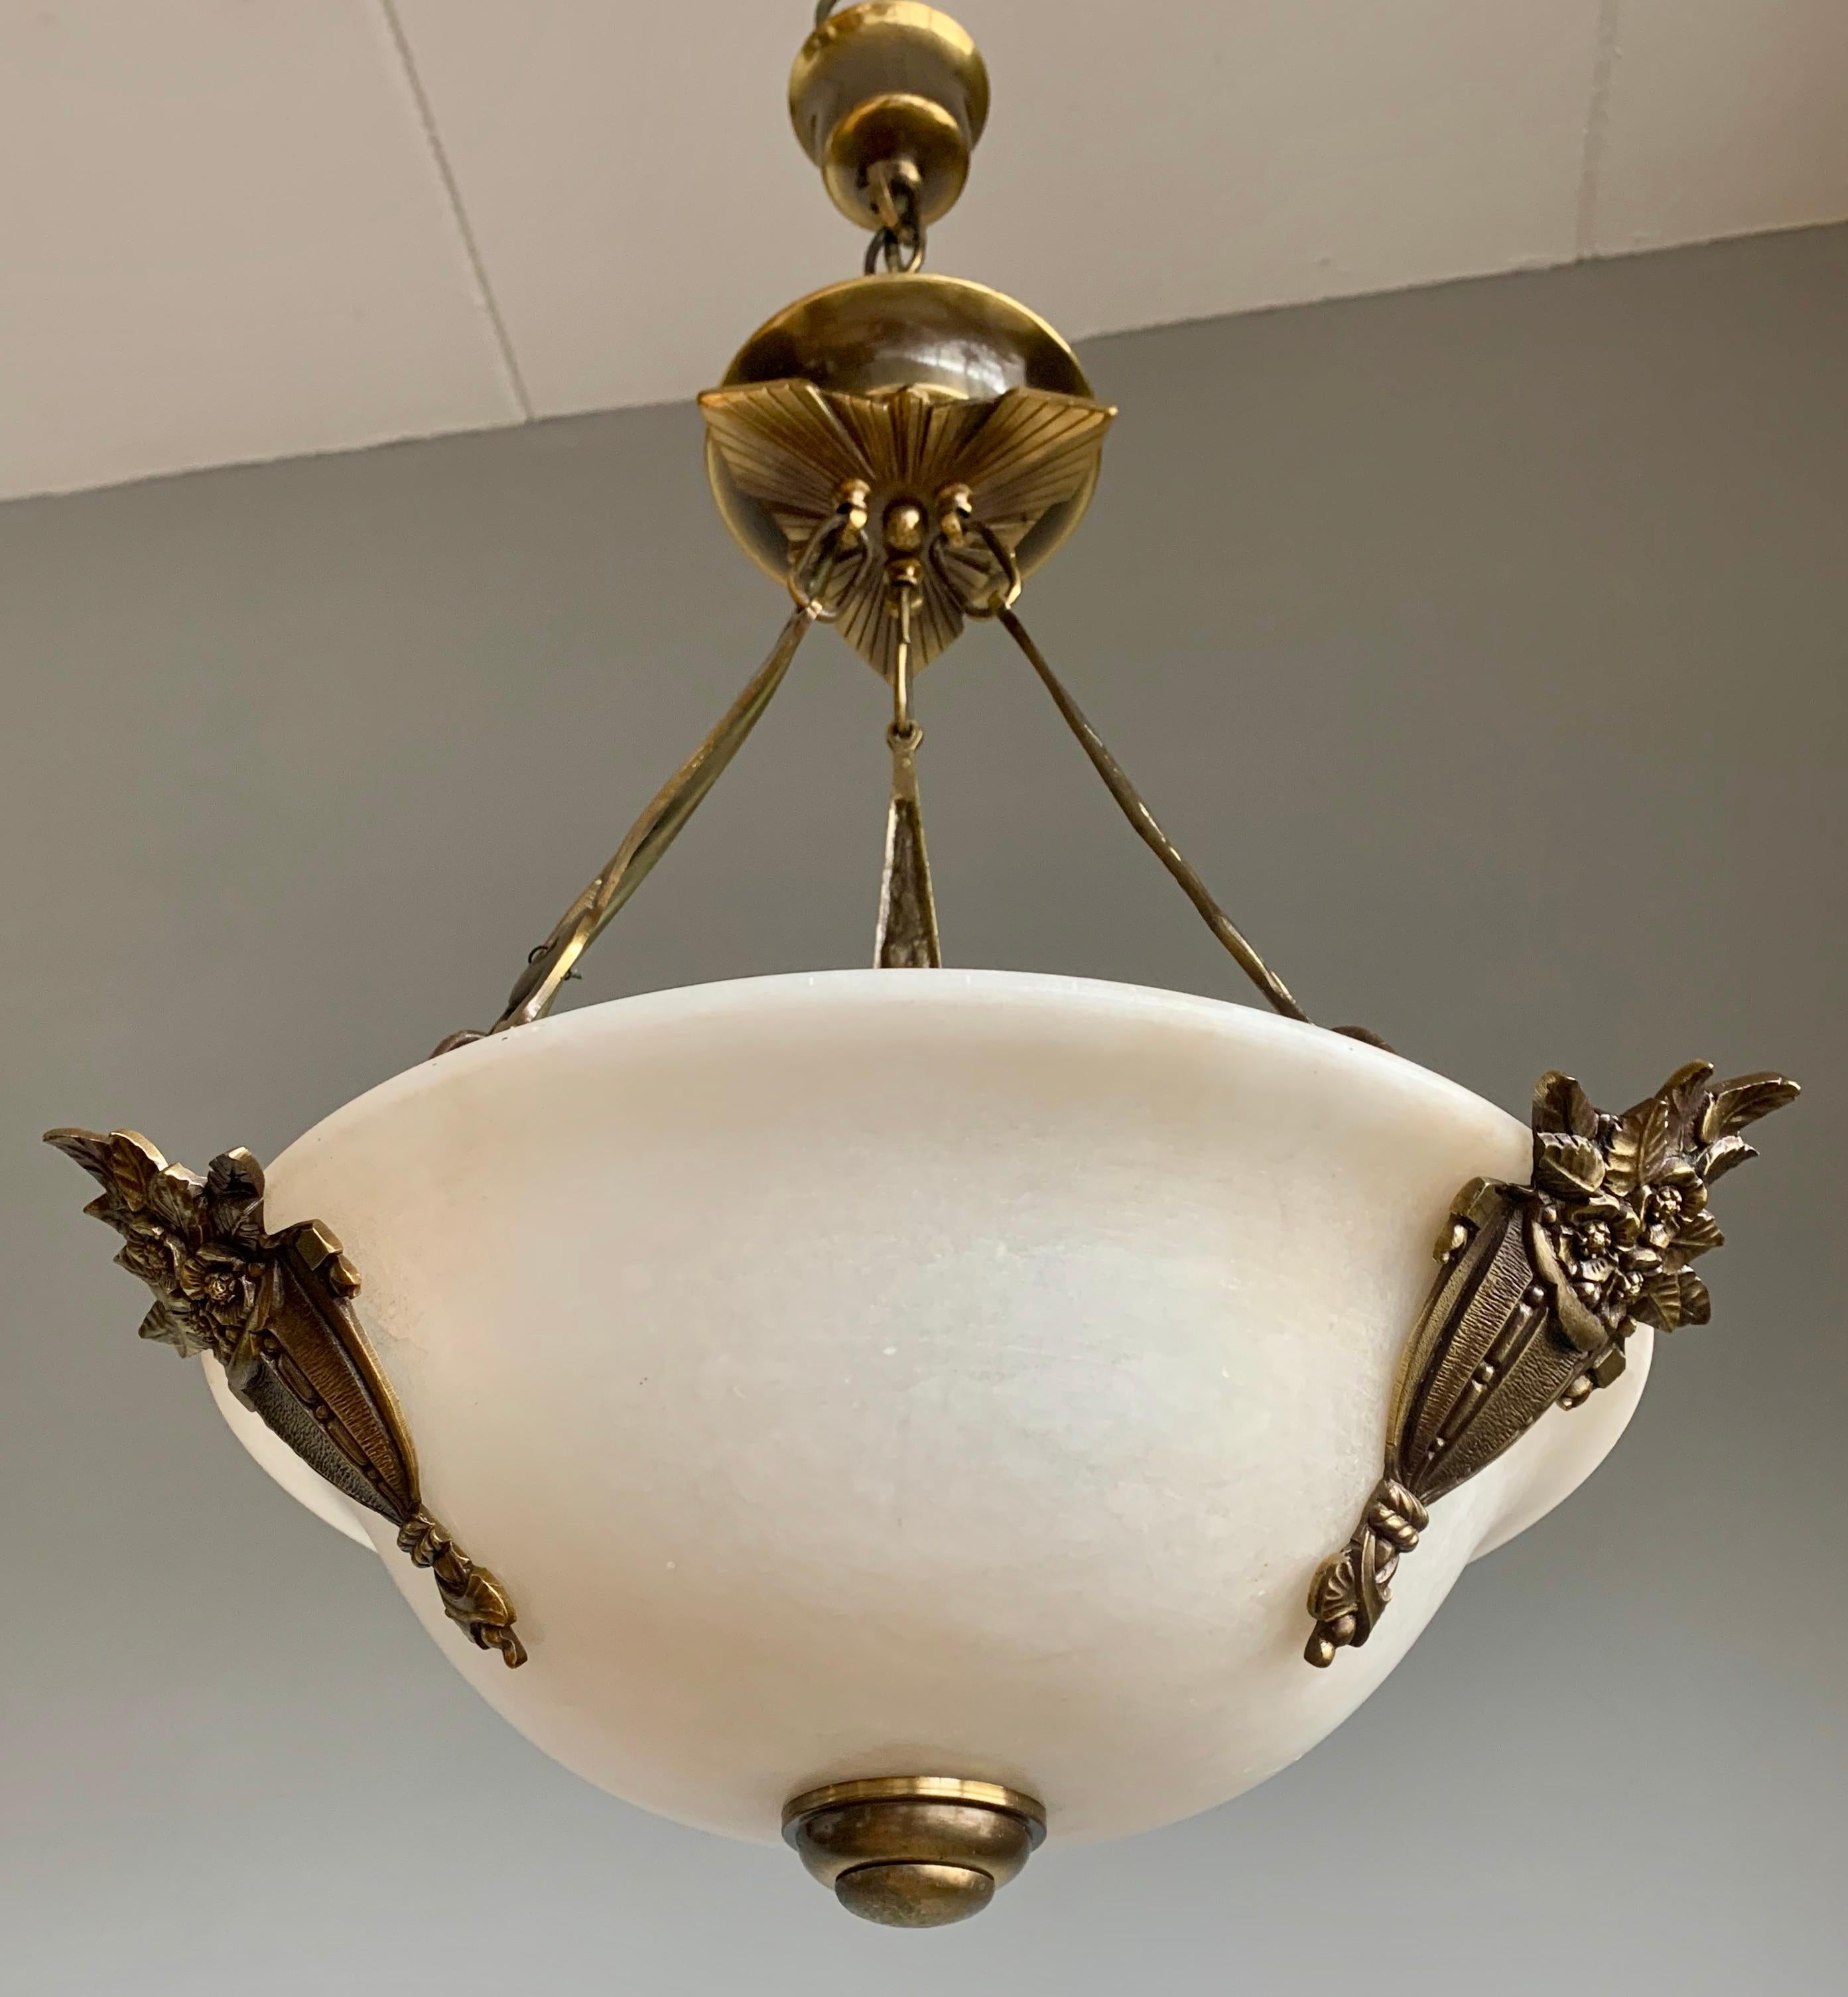 Excellent condition and rare design, 3-light chandelier.

If you like Art Deco light fixtures, but you prefer to have them like new, then this 1970s alabaster, bronze and brass chandelier could be perfect for you. The combination of the white